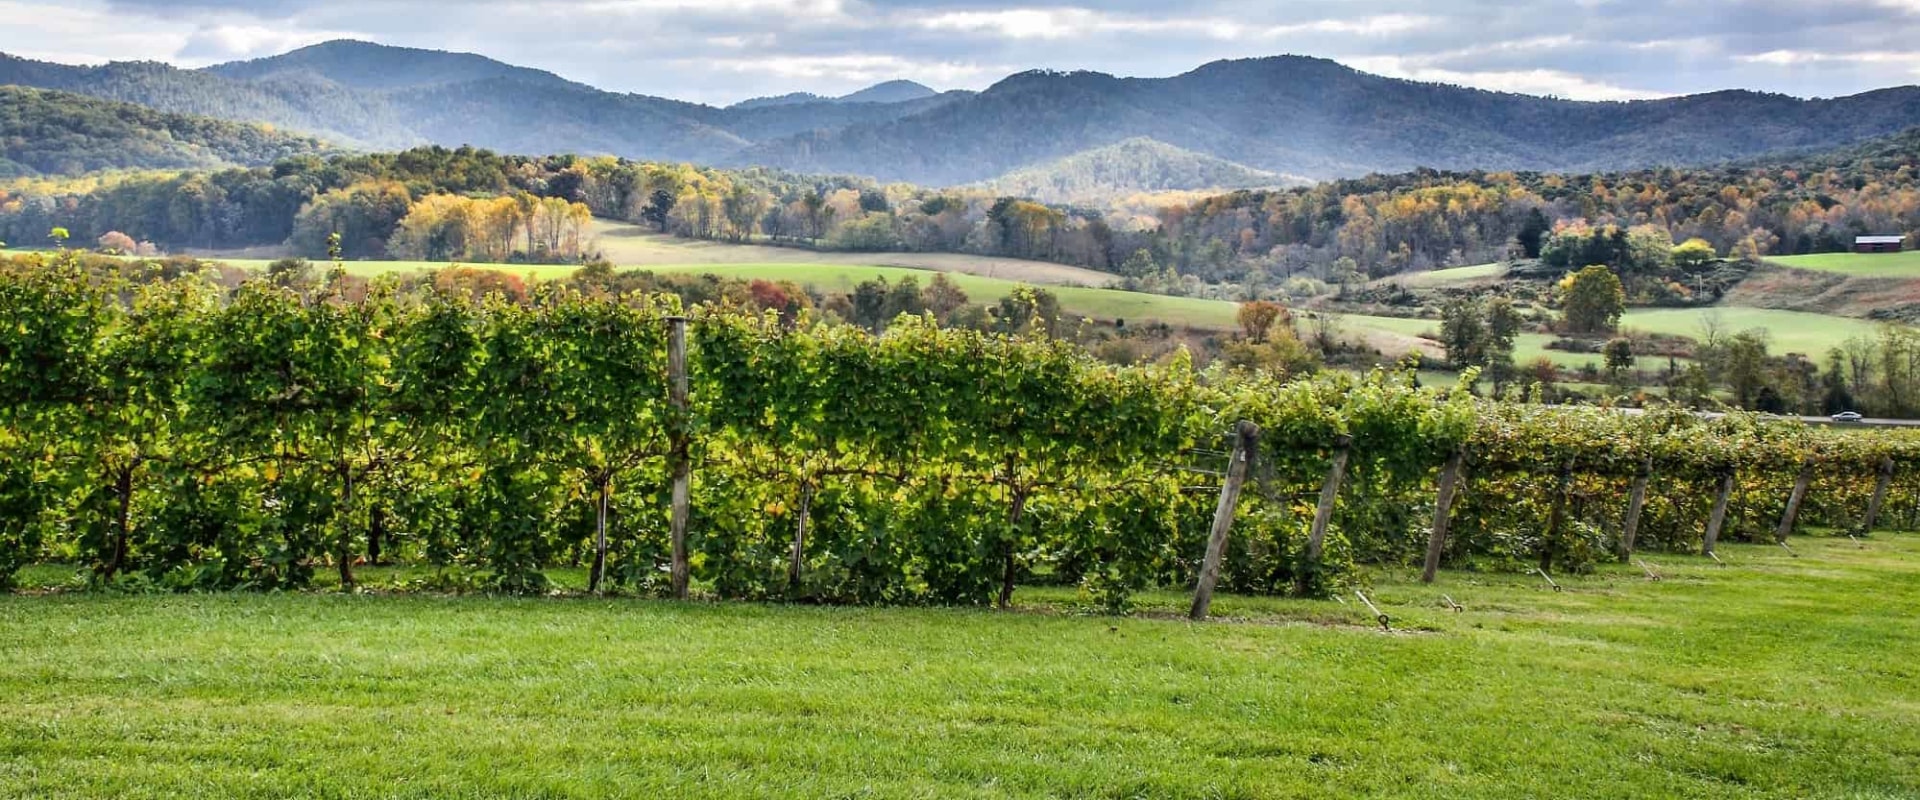 Exploring the Vineyards in Dulles, Virginia: Are There Any Restrictions on Bringing Outside Food or Drinks?